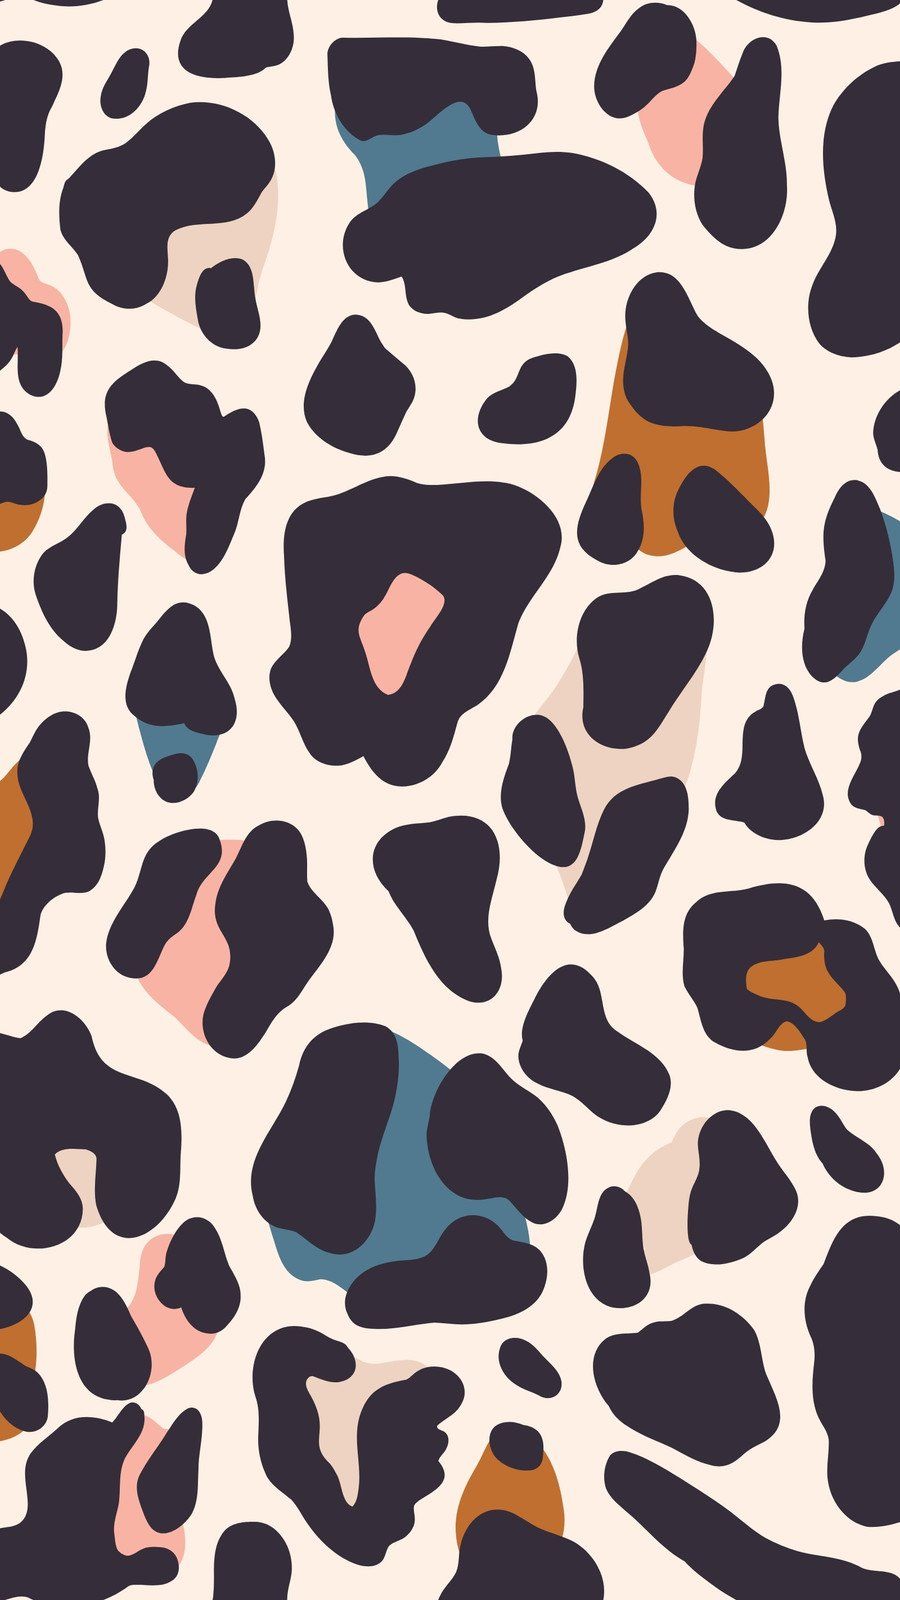 A leopard print phone wallpaper with a pastel color scheme - Abstract, leopard